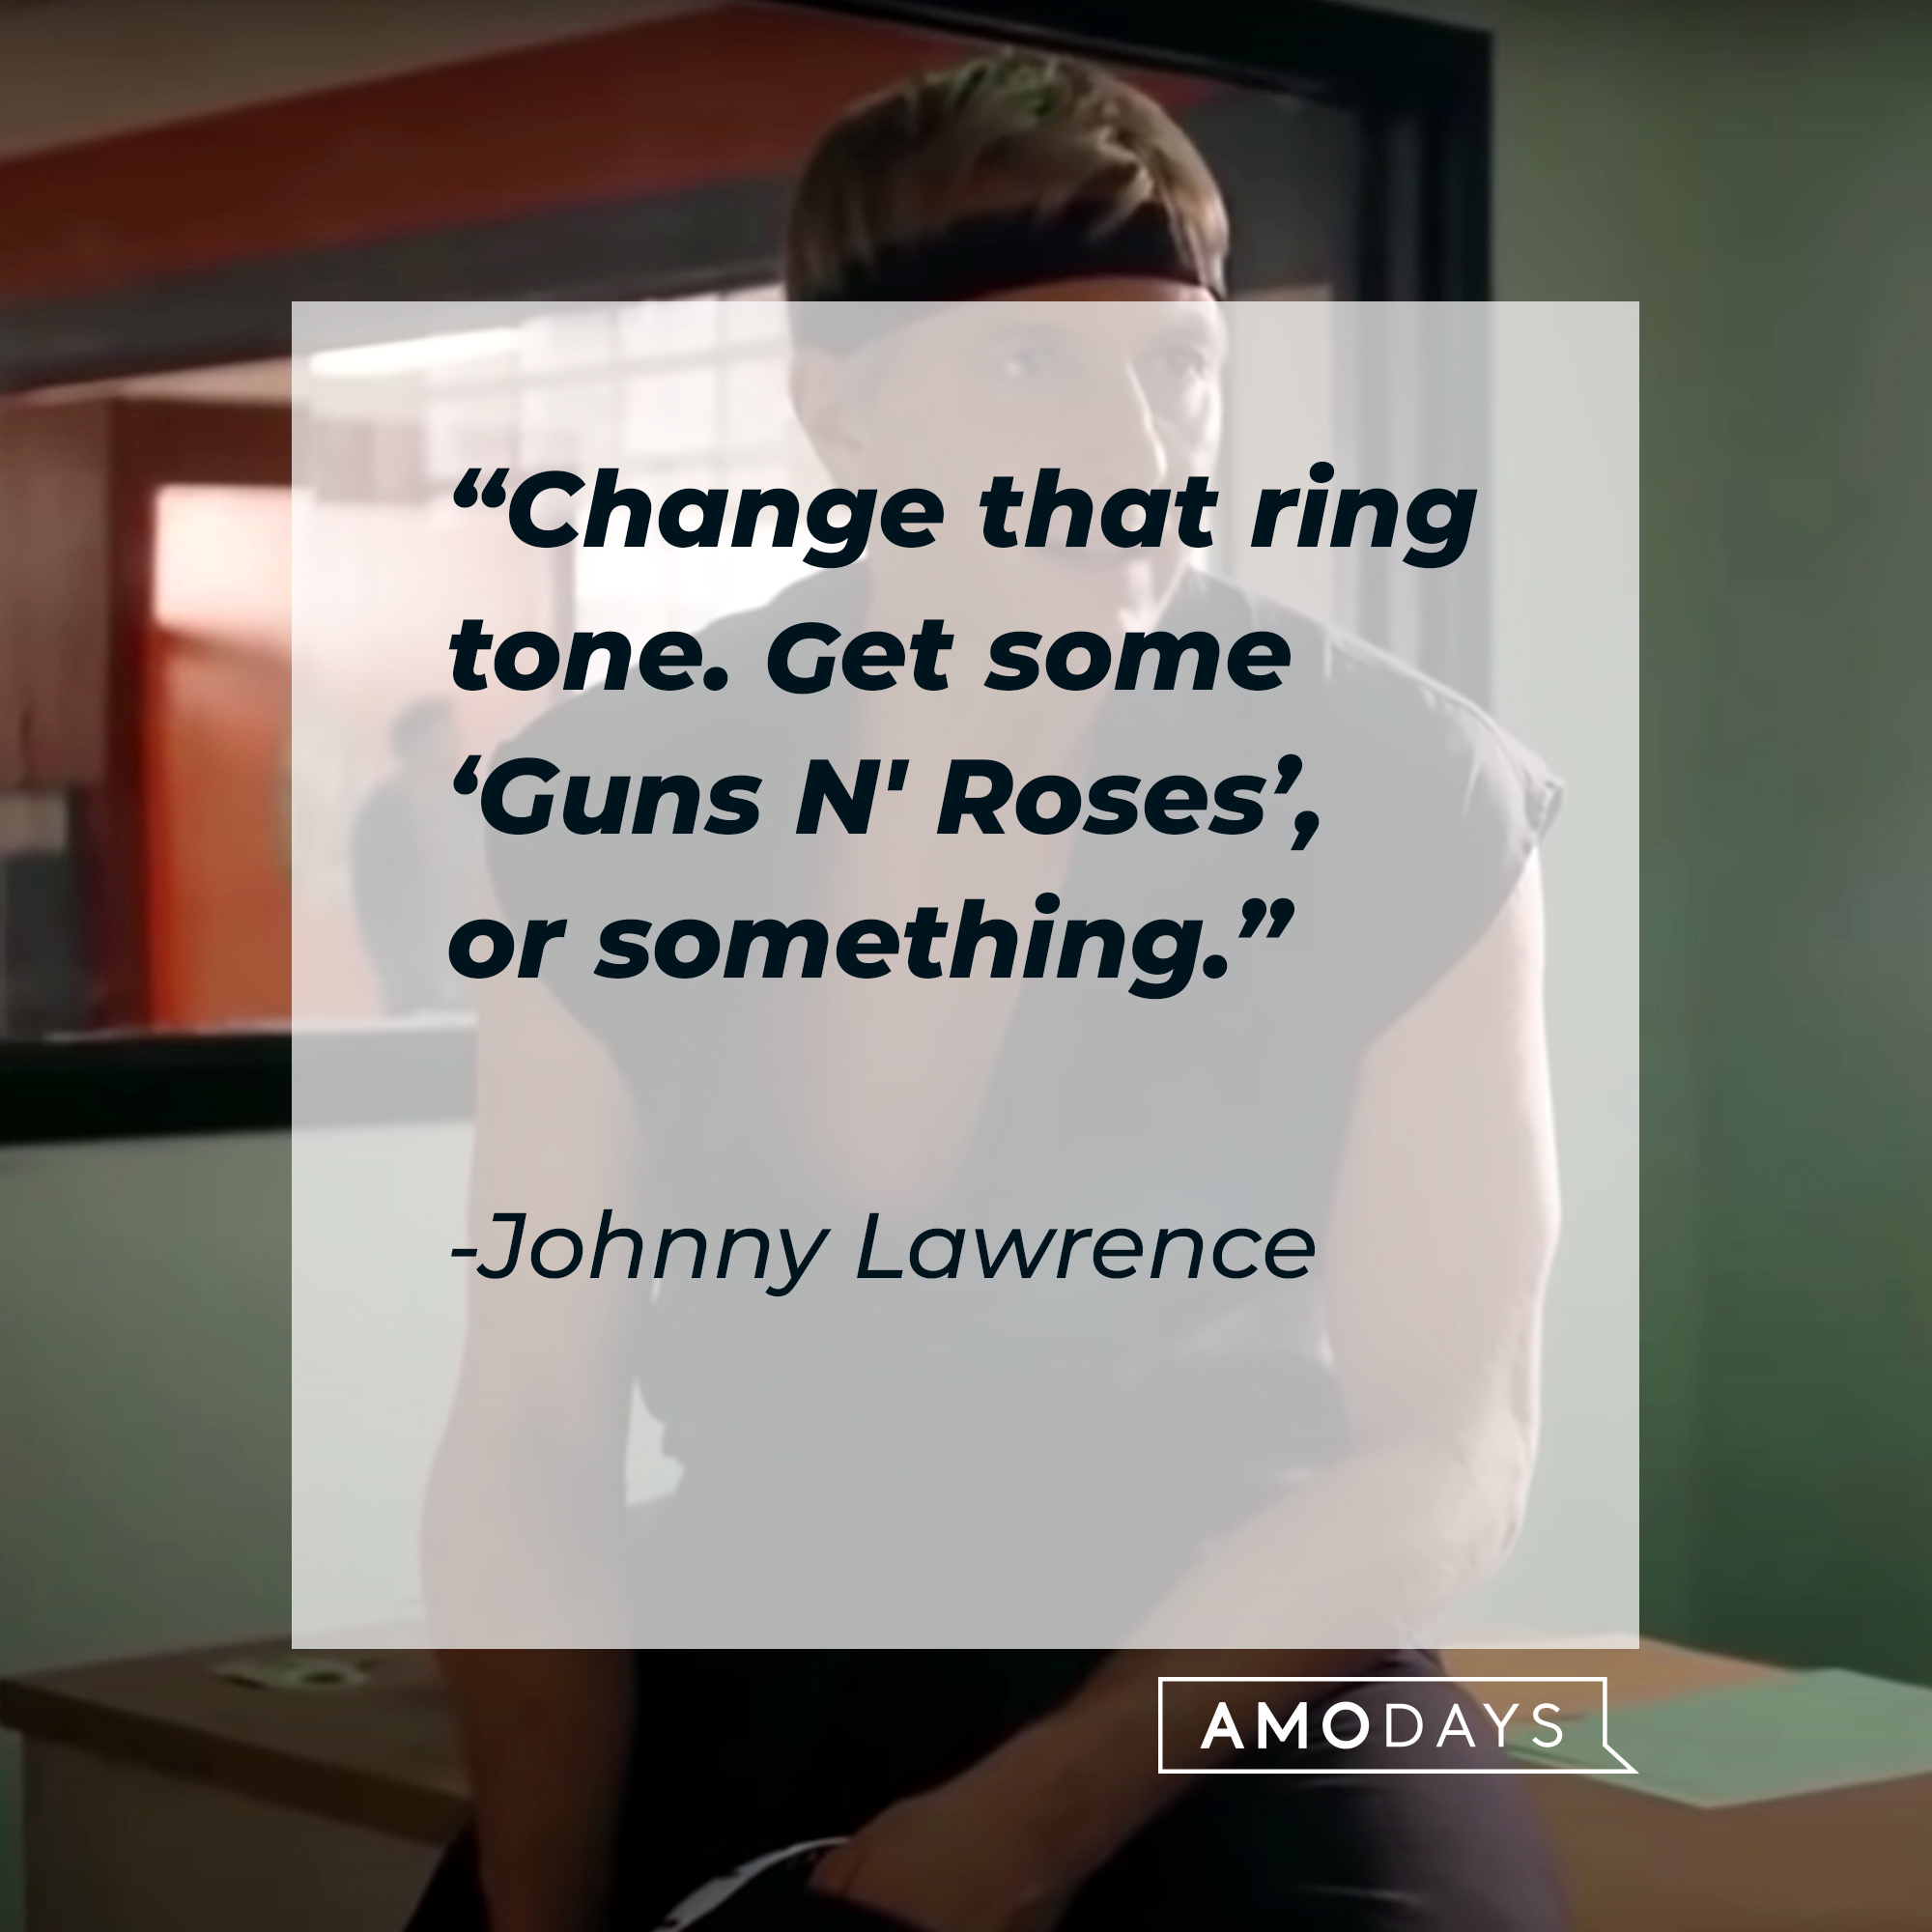 Johnny Lawrence, with his quote: "Change that ring tone. Get some ‘Guns N' Roses’, or something." | Source: facebook.com/CobraKaiSeries